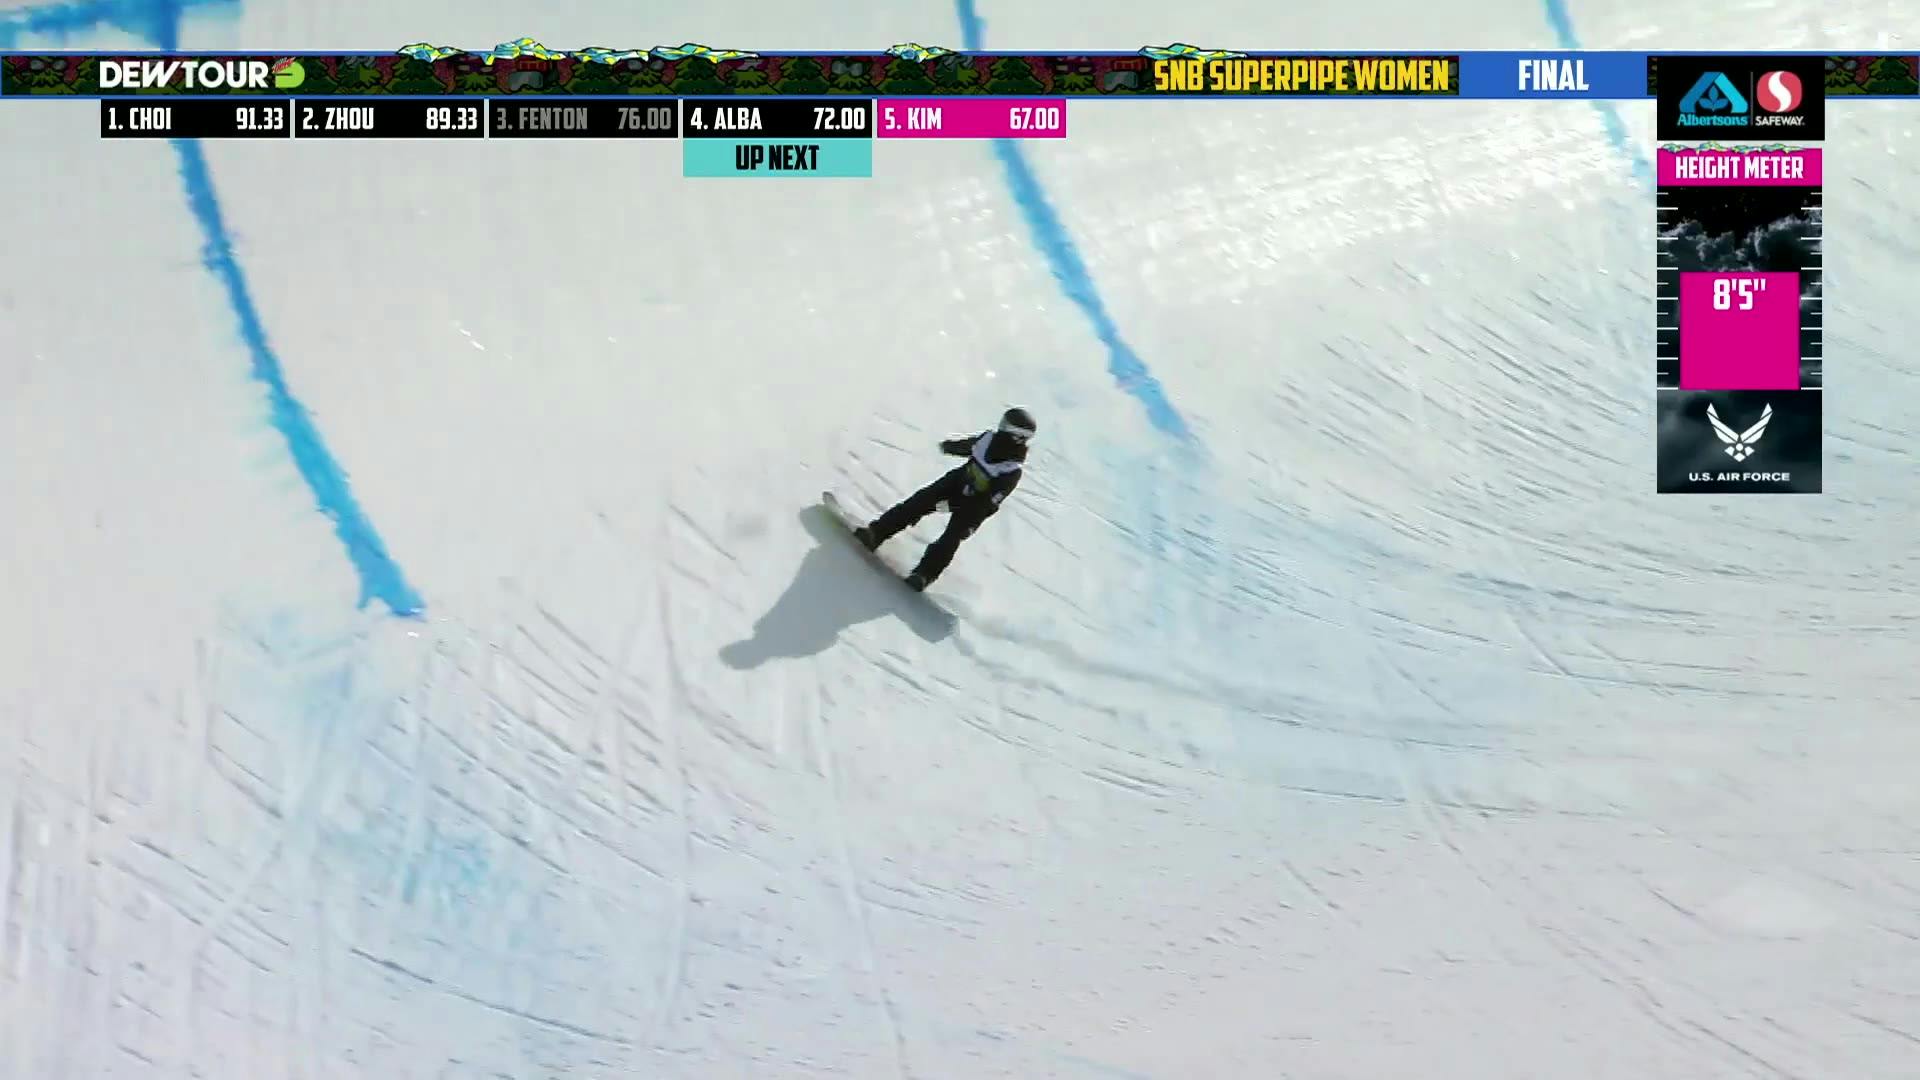 Dew Tour Copper Mountain Women's Snowboard Superpipe Final FOR FAST